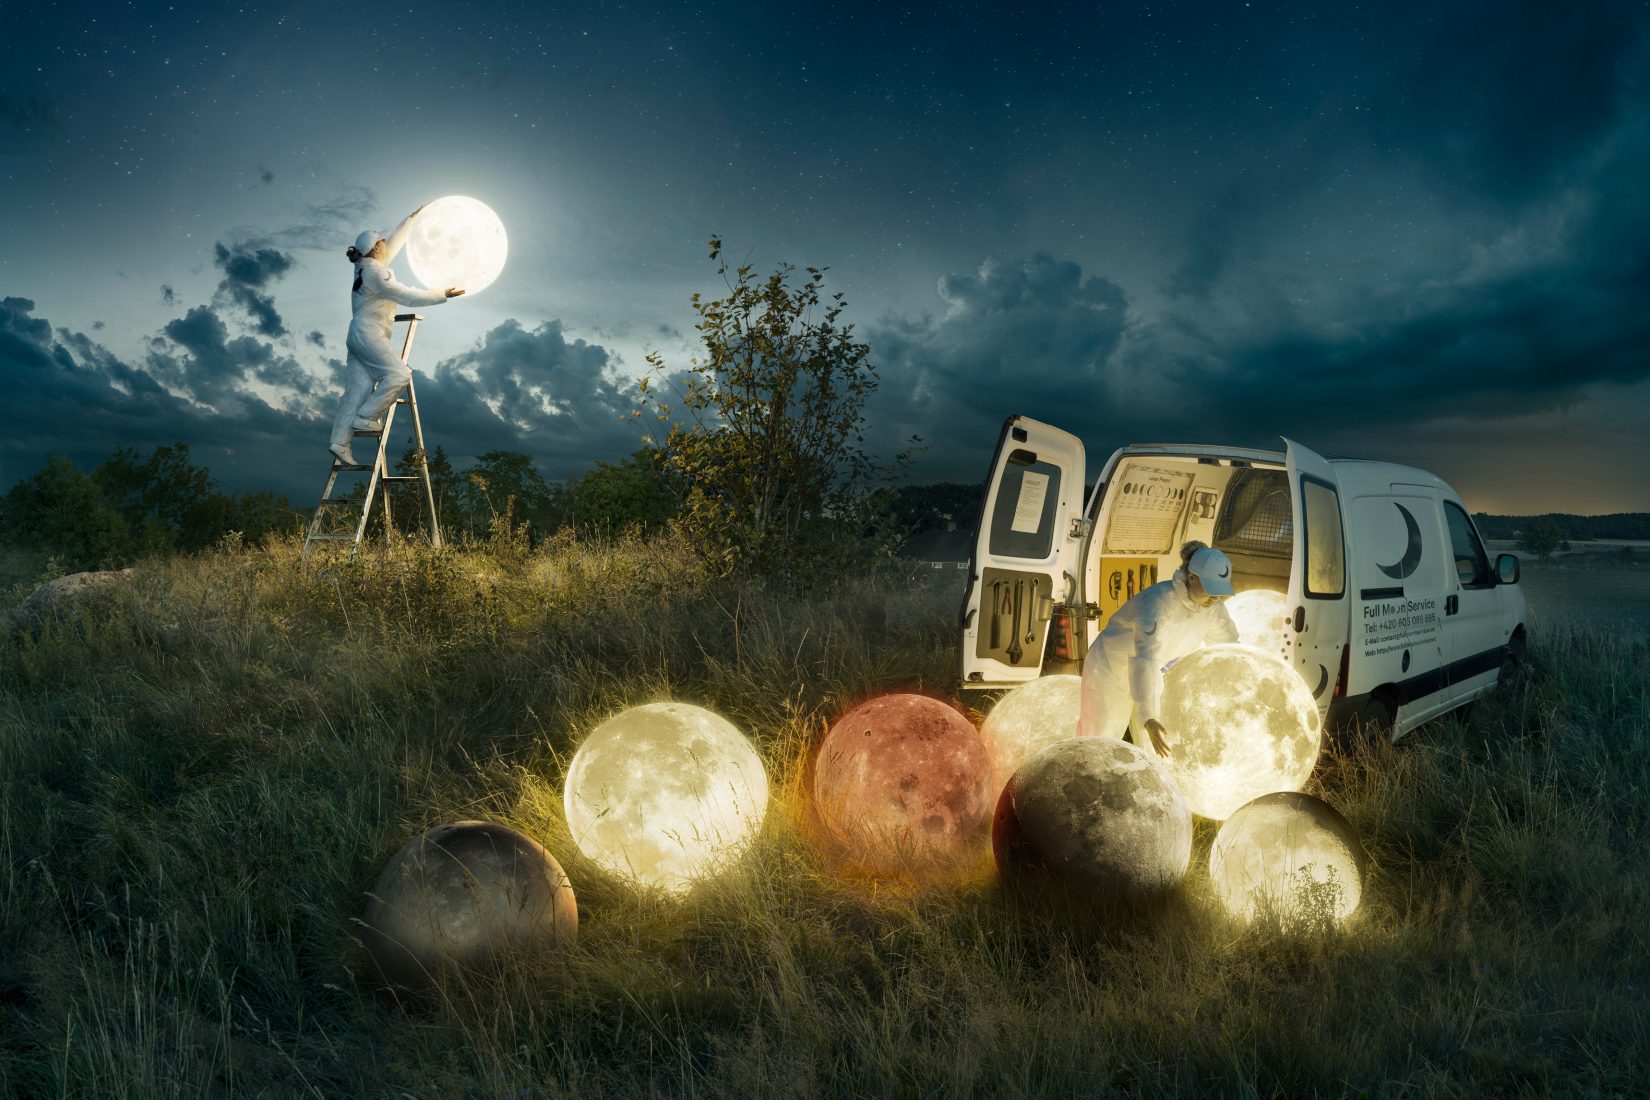 Photo of a worker in a white uniform replacing the full moon in the night sky, while his colleague manages a stock of full moons at the rear of a service van.